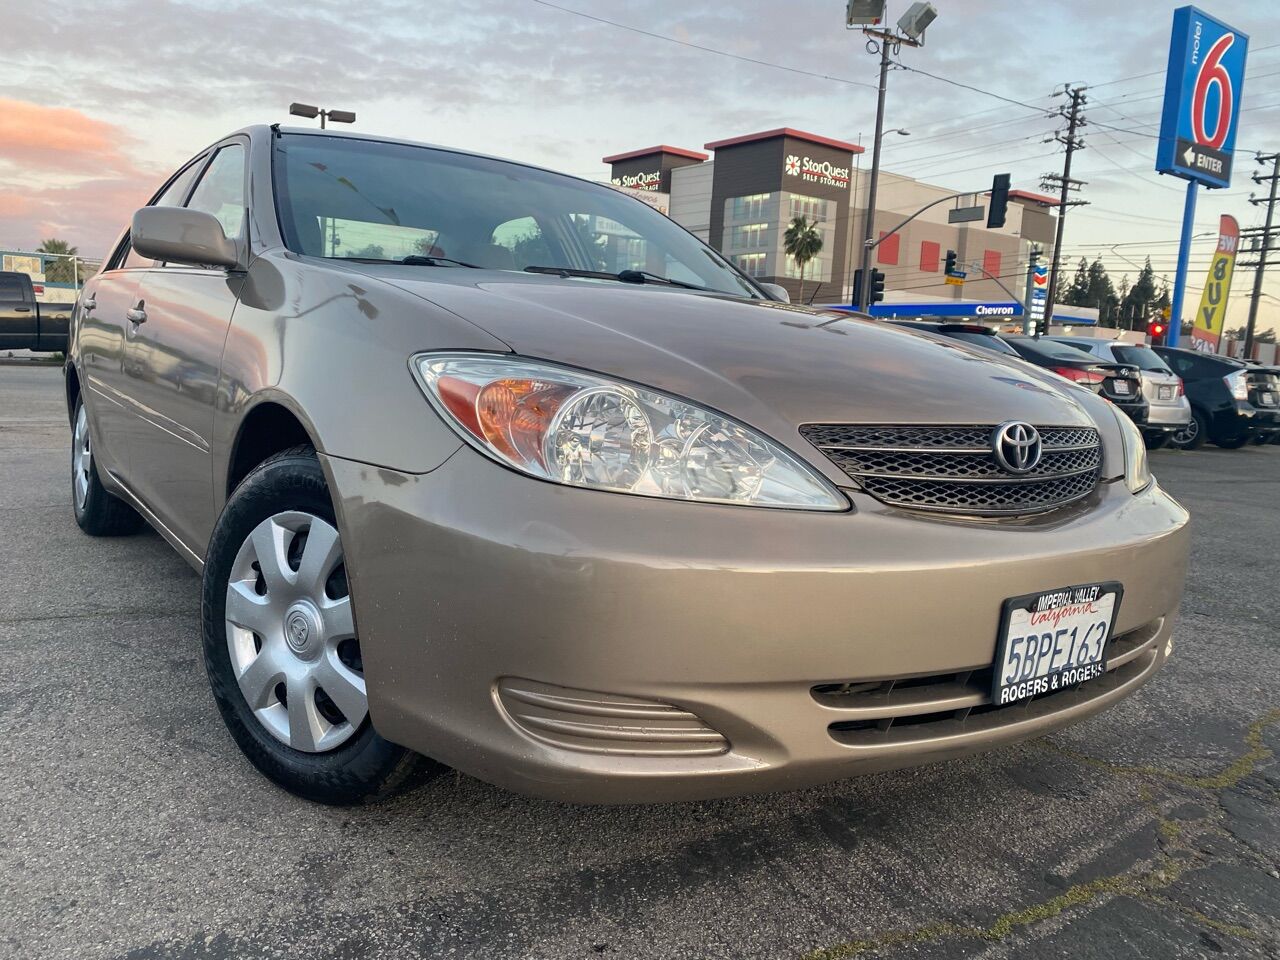 2003 Toyota Camry For Sale In California - Carsforsale.com®